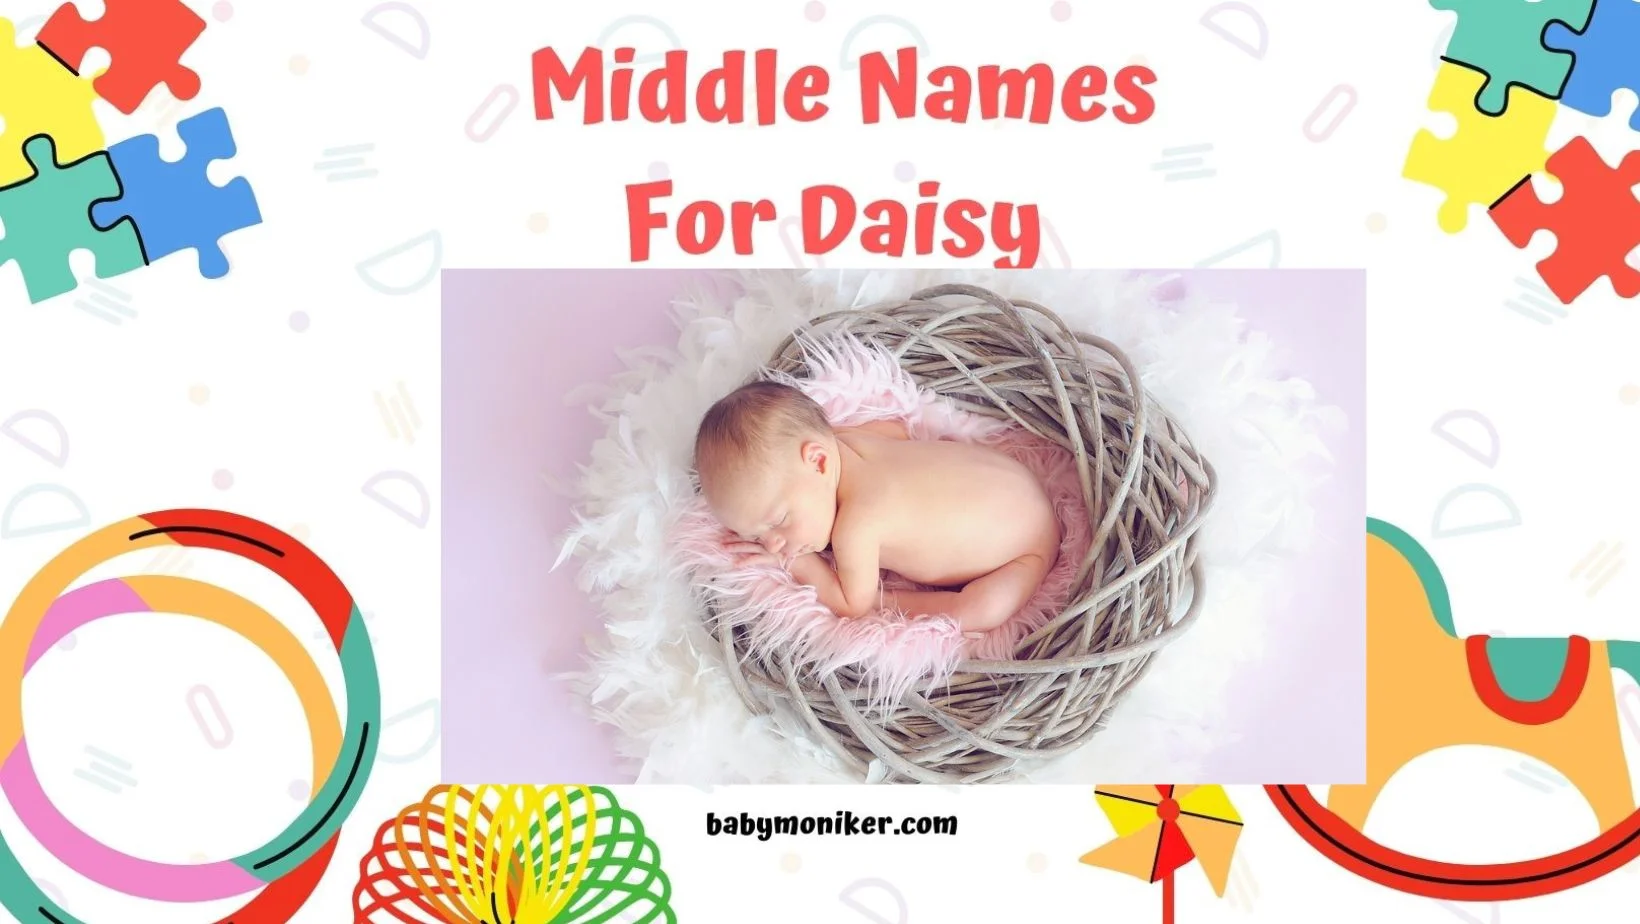 Middle Names for Daisy